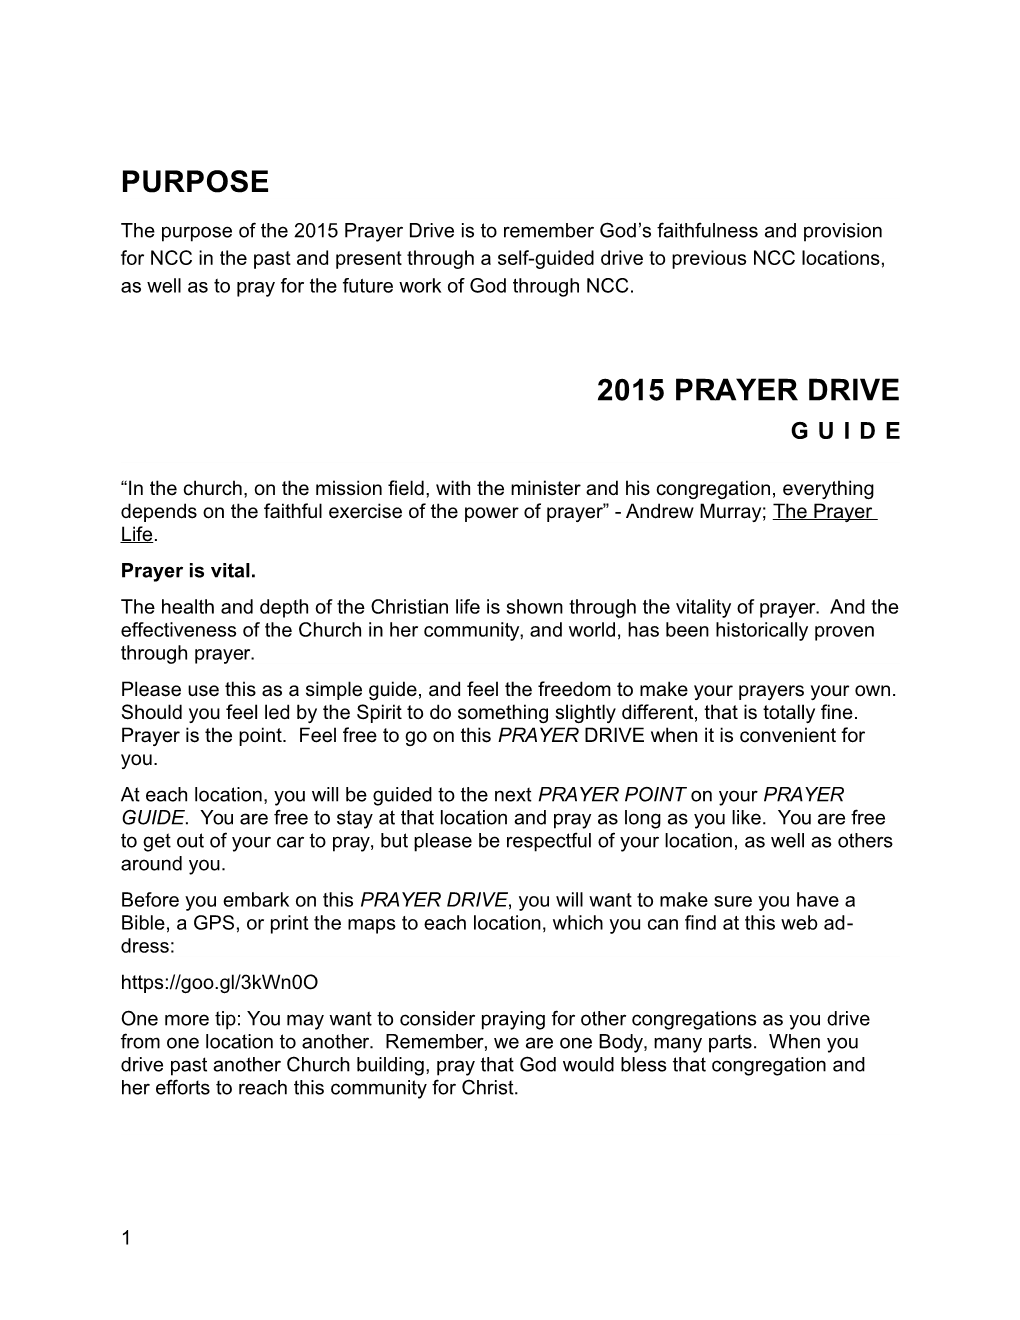 The Purpose of the 2015 Prayer Drive Is to Remember God S Faithfulness and Provision For